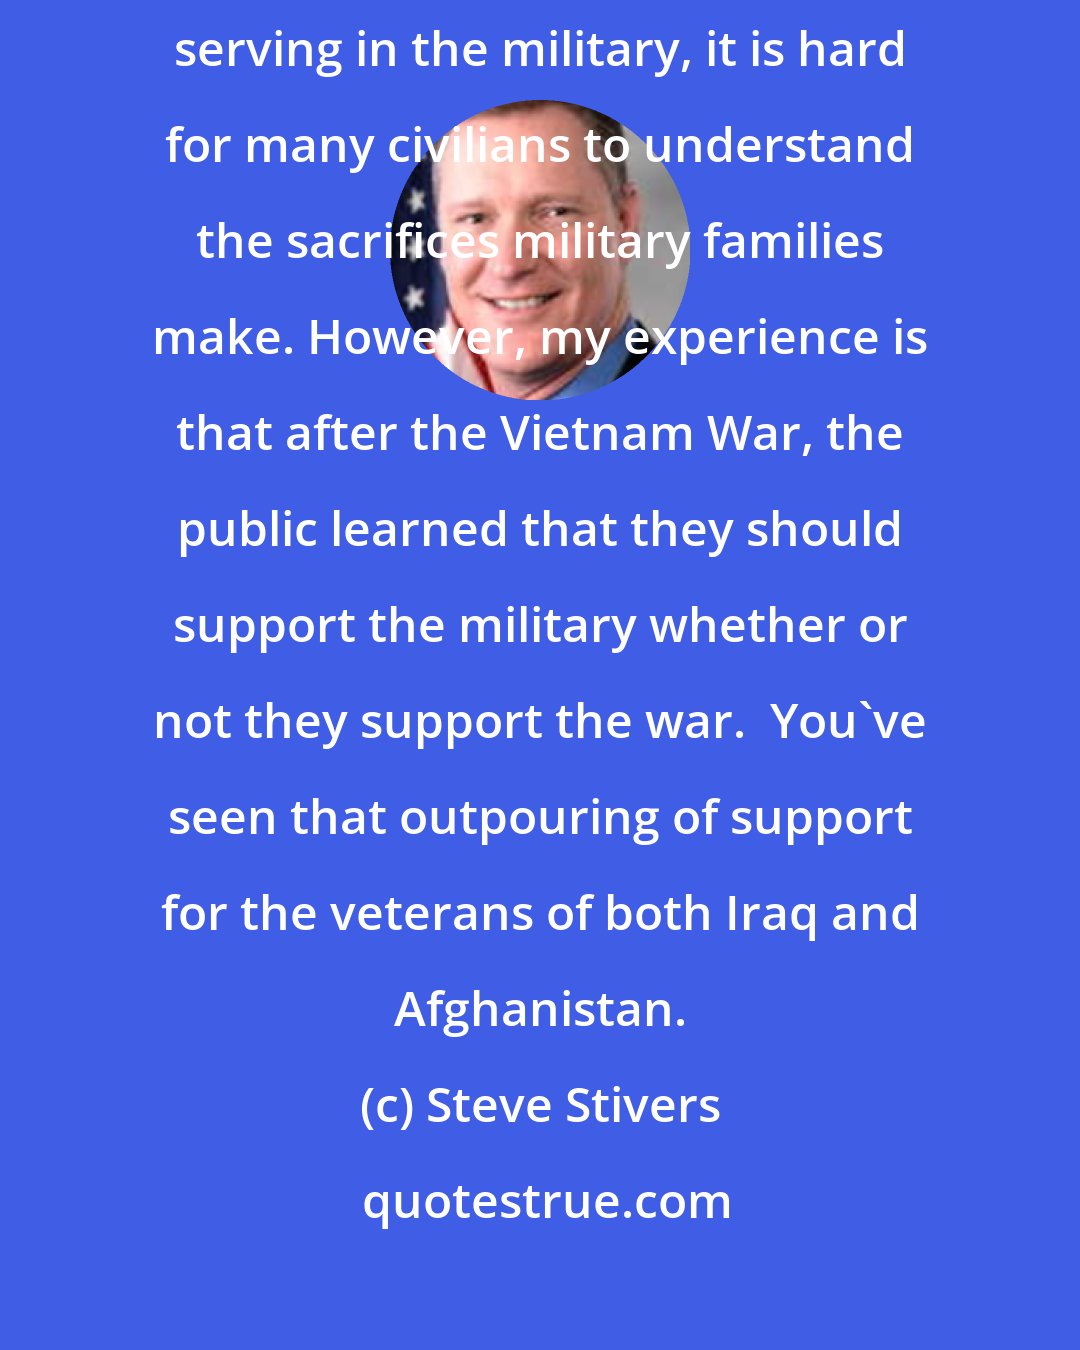 Steve Stivers: Yes and no. Because America has only about 1 percent of the population serving in the military, it is hard for many civilians to understand the sacrifices military families make. However, my experience is that after the Vietnam War, the public learned that they should support the military whether or not they support the war.  You've seen that outpouring of support for the veterans of both Iraq and Afghanistan.